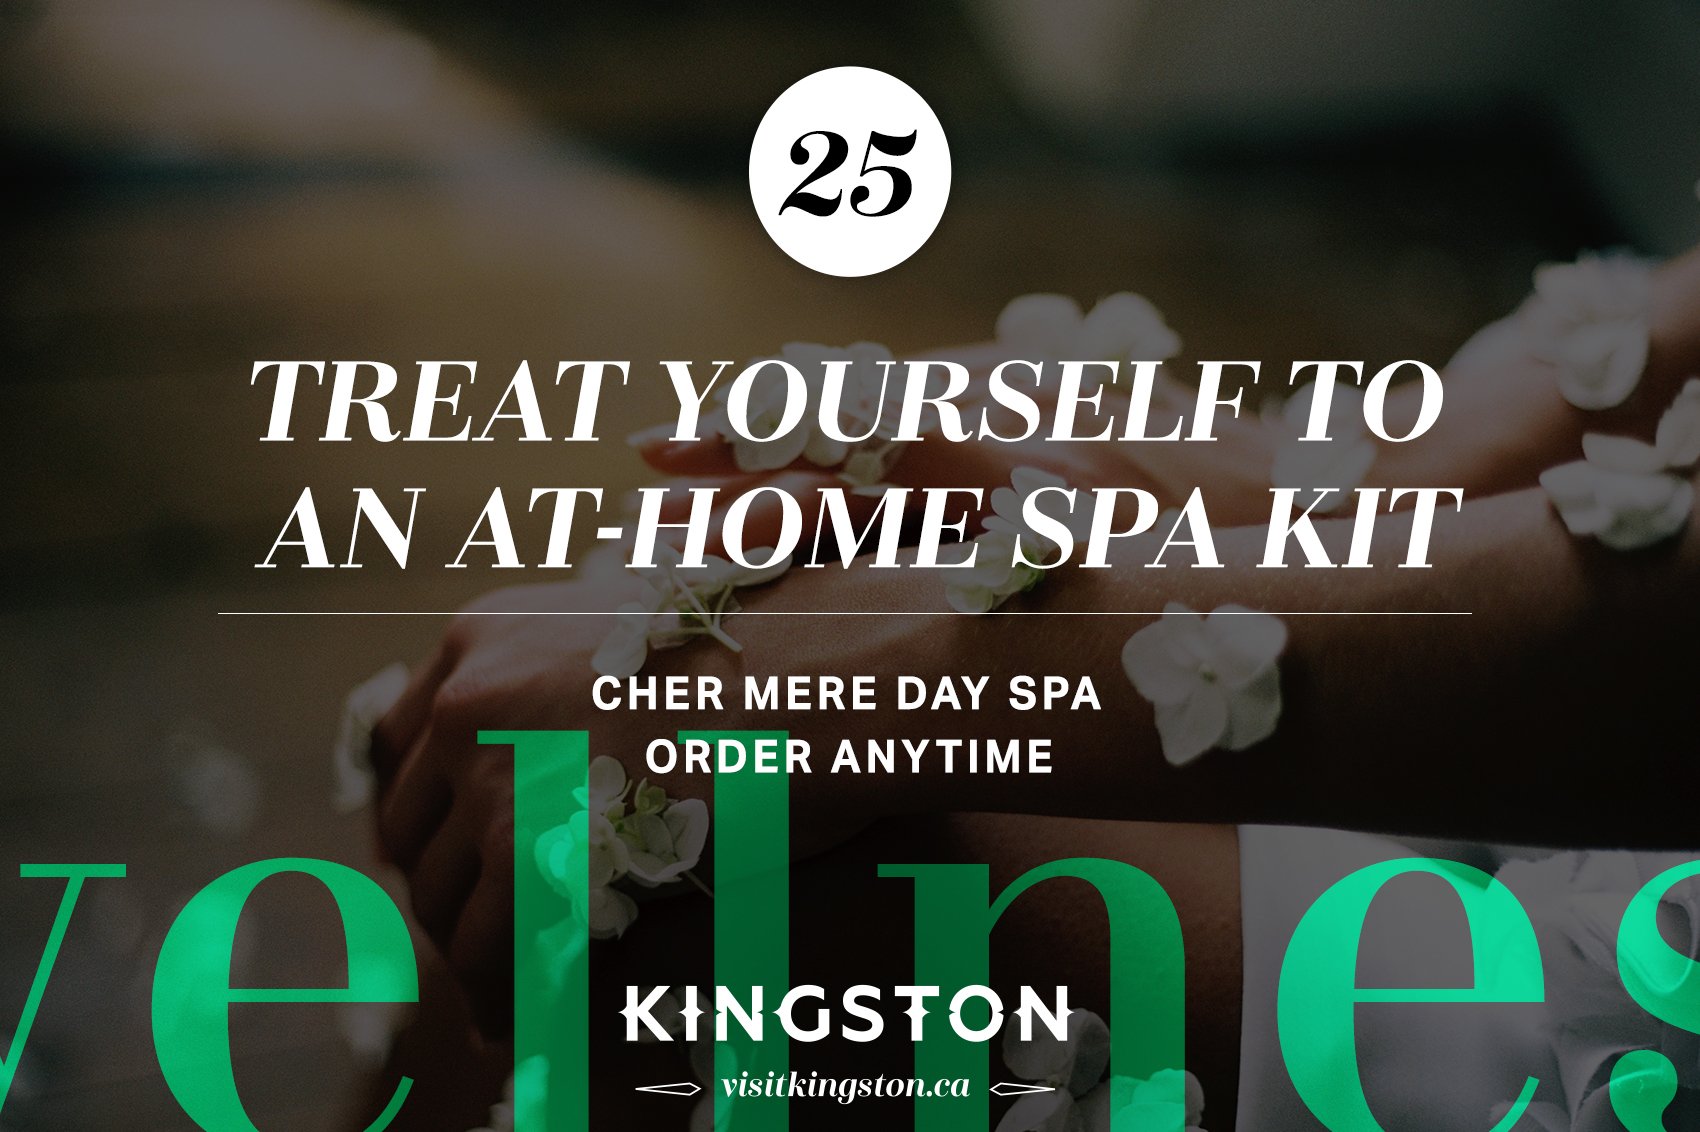 Treat yourself to an at-home spa kit